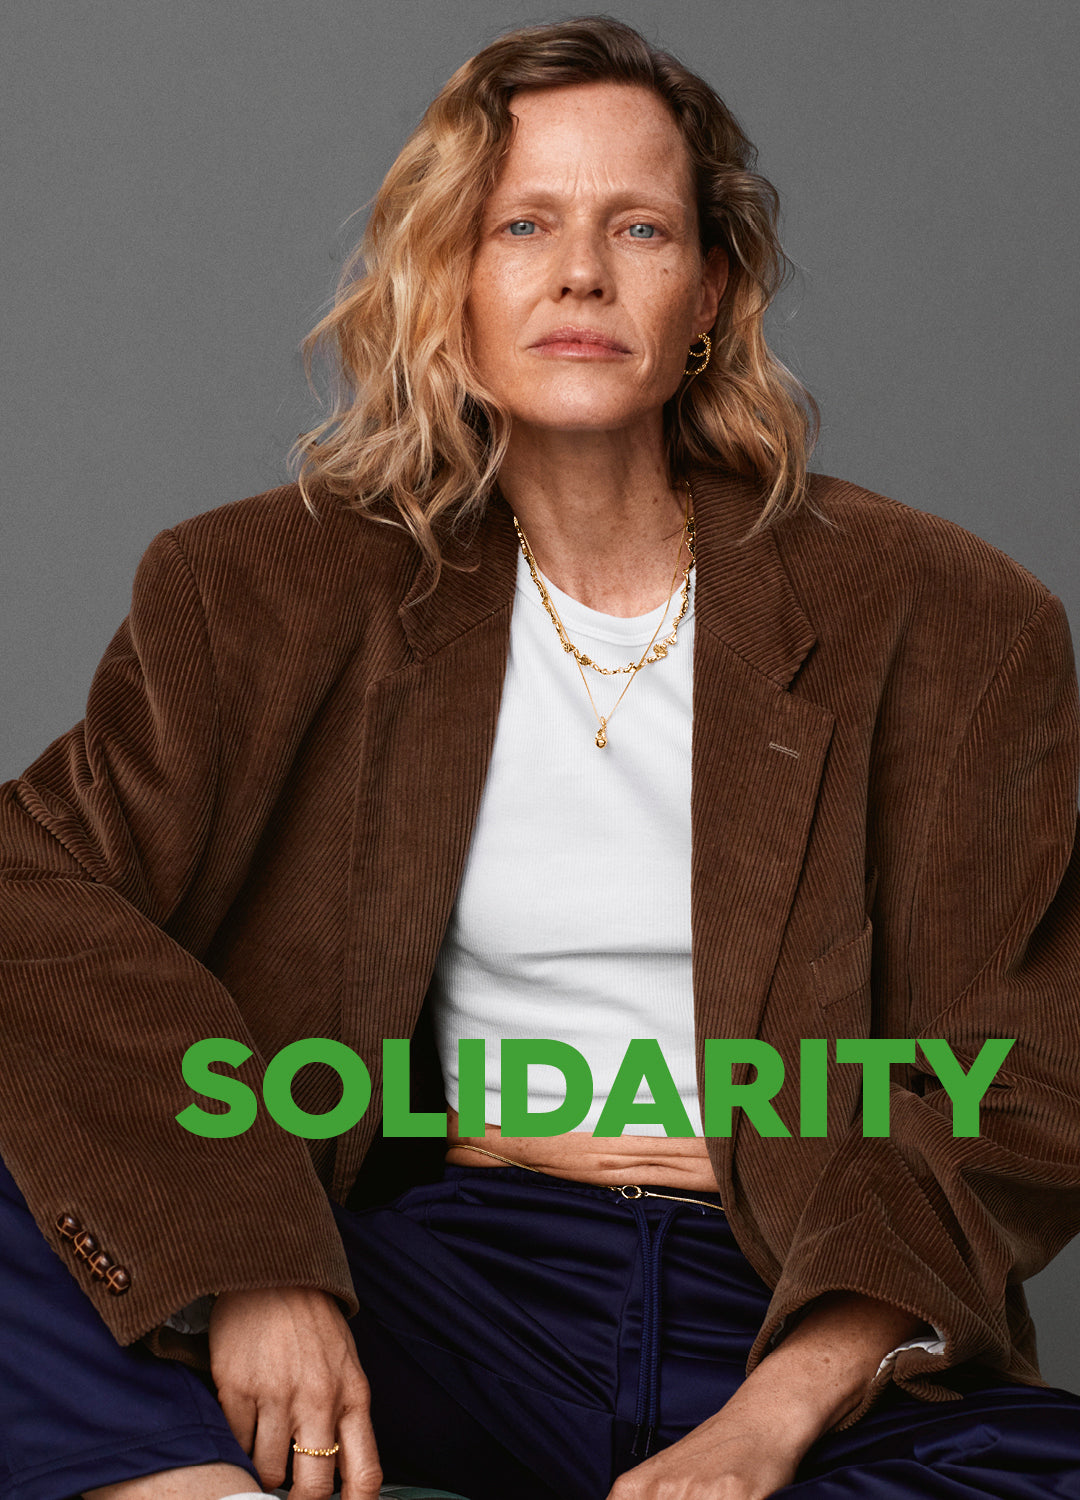 EXPLORE THE SOLIDARITY COLLECTION